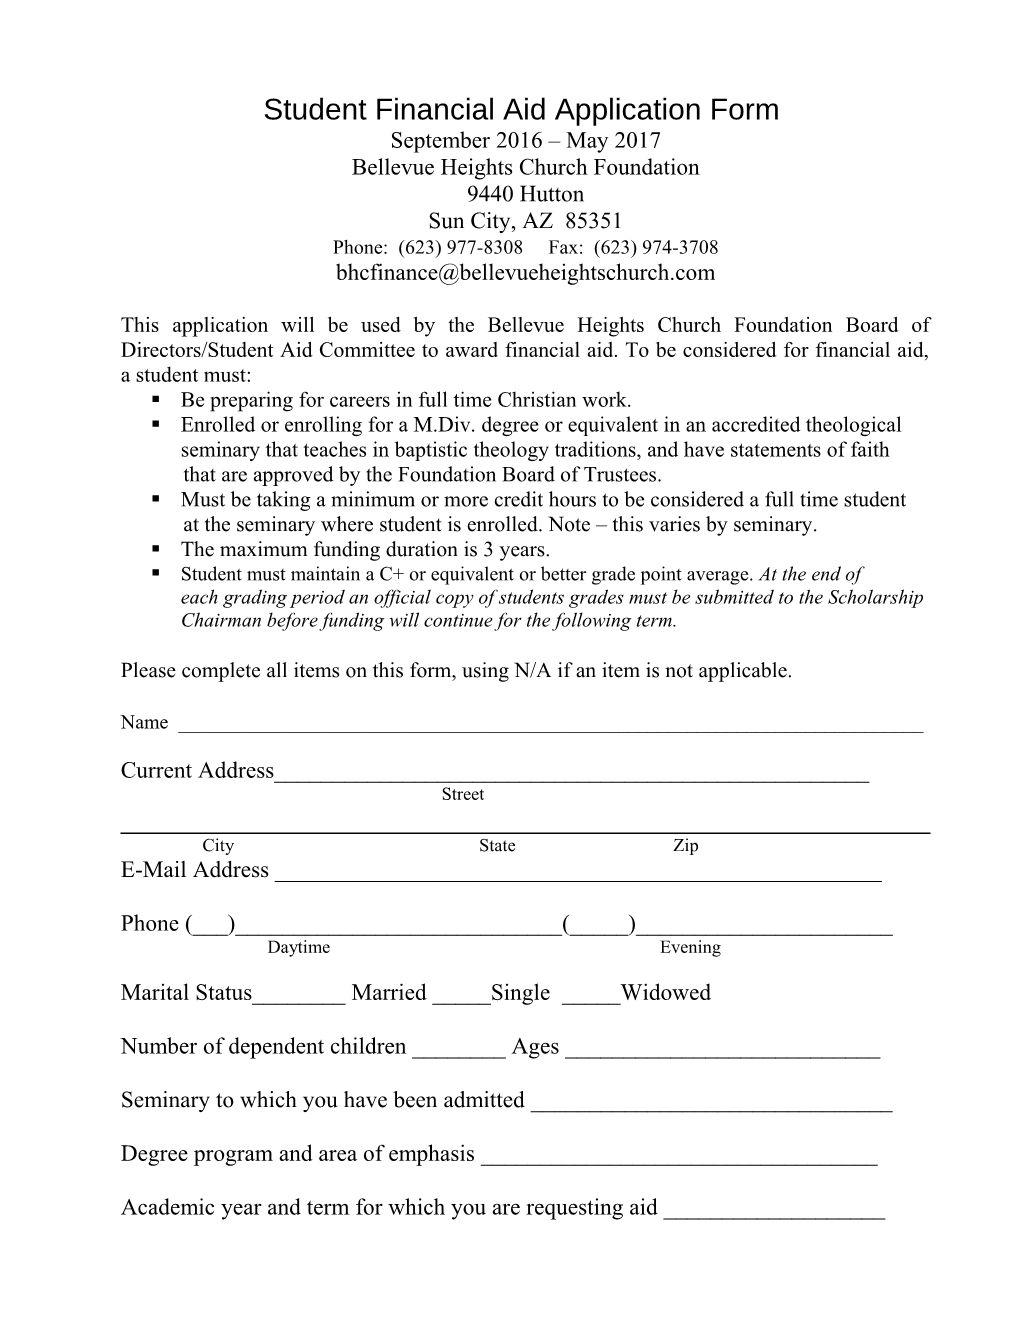 Student Financial Aid Application Form